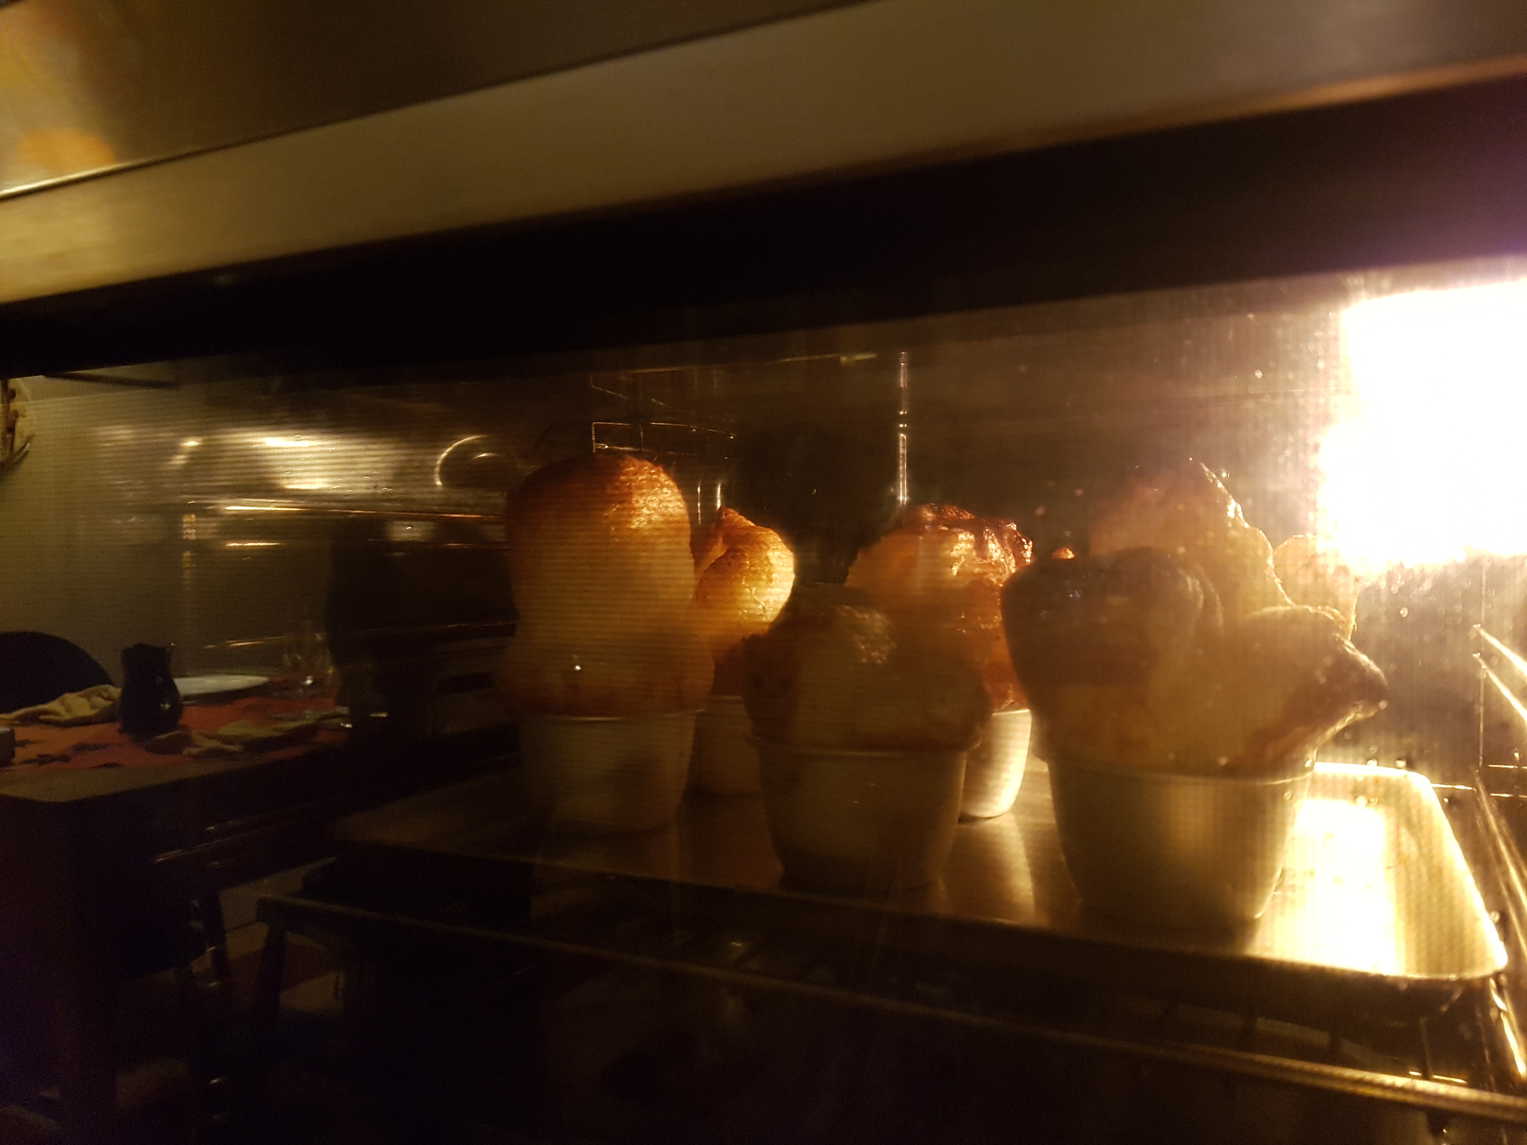 Yorkshires Rising like a Mad Science Experiement